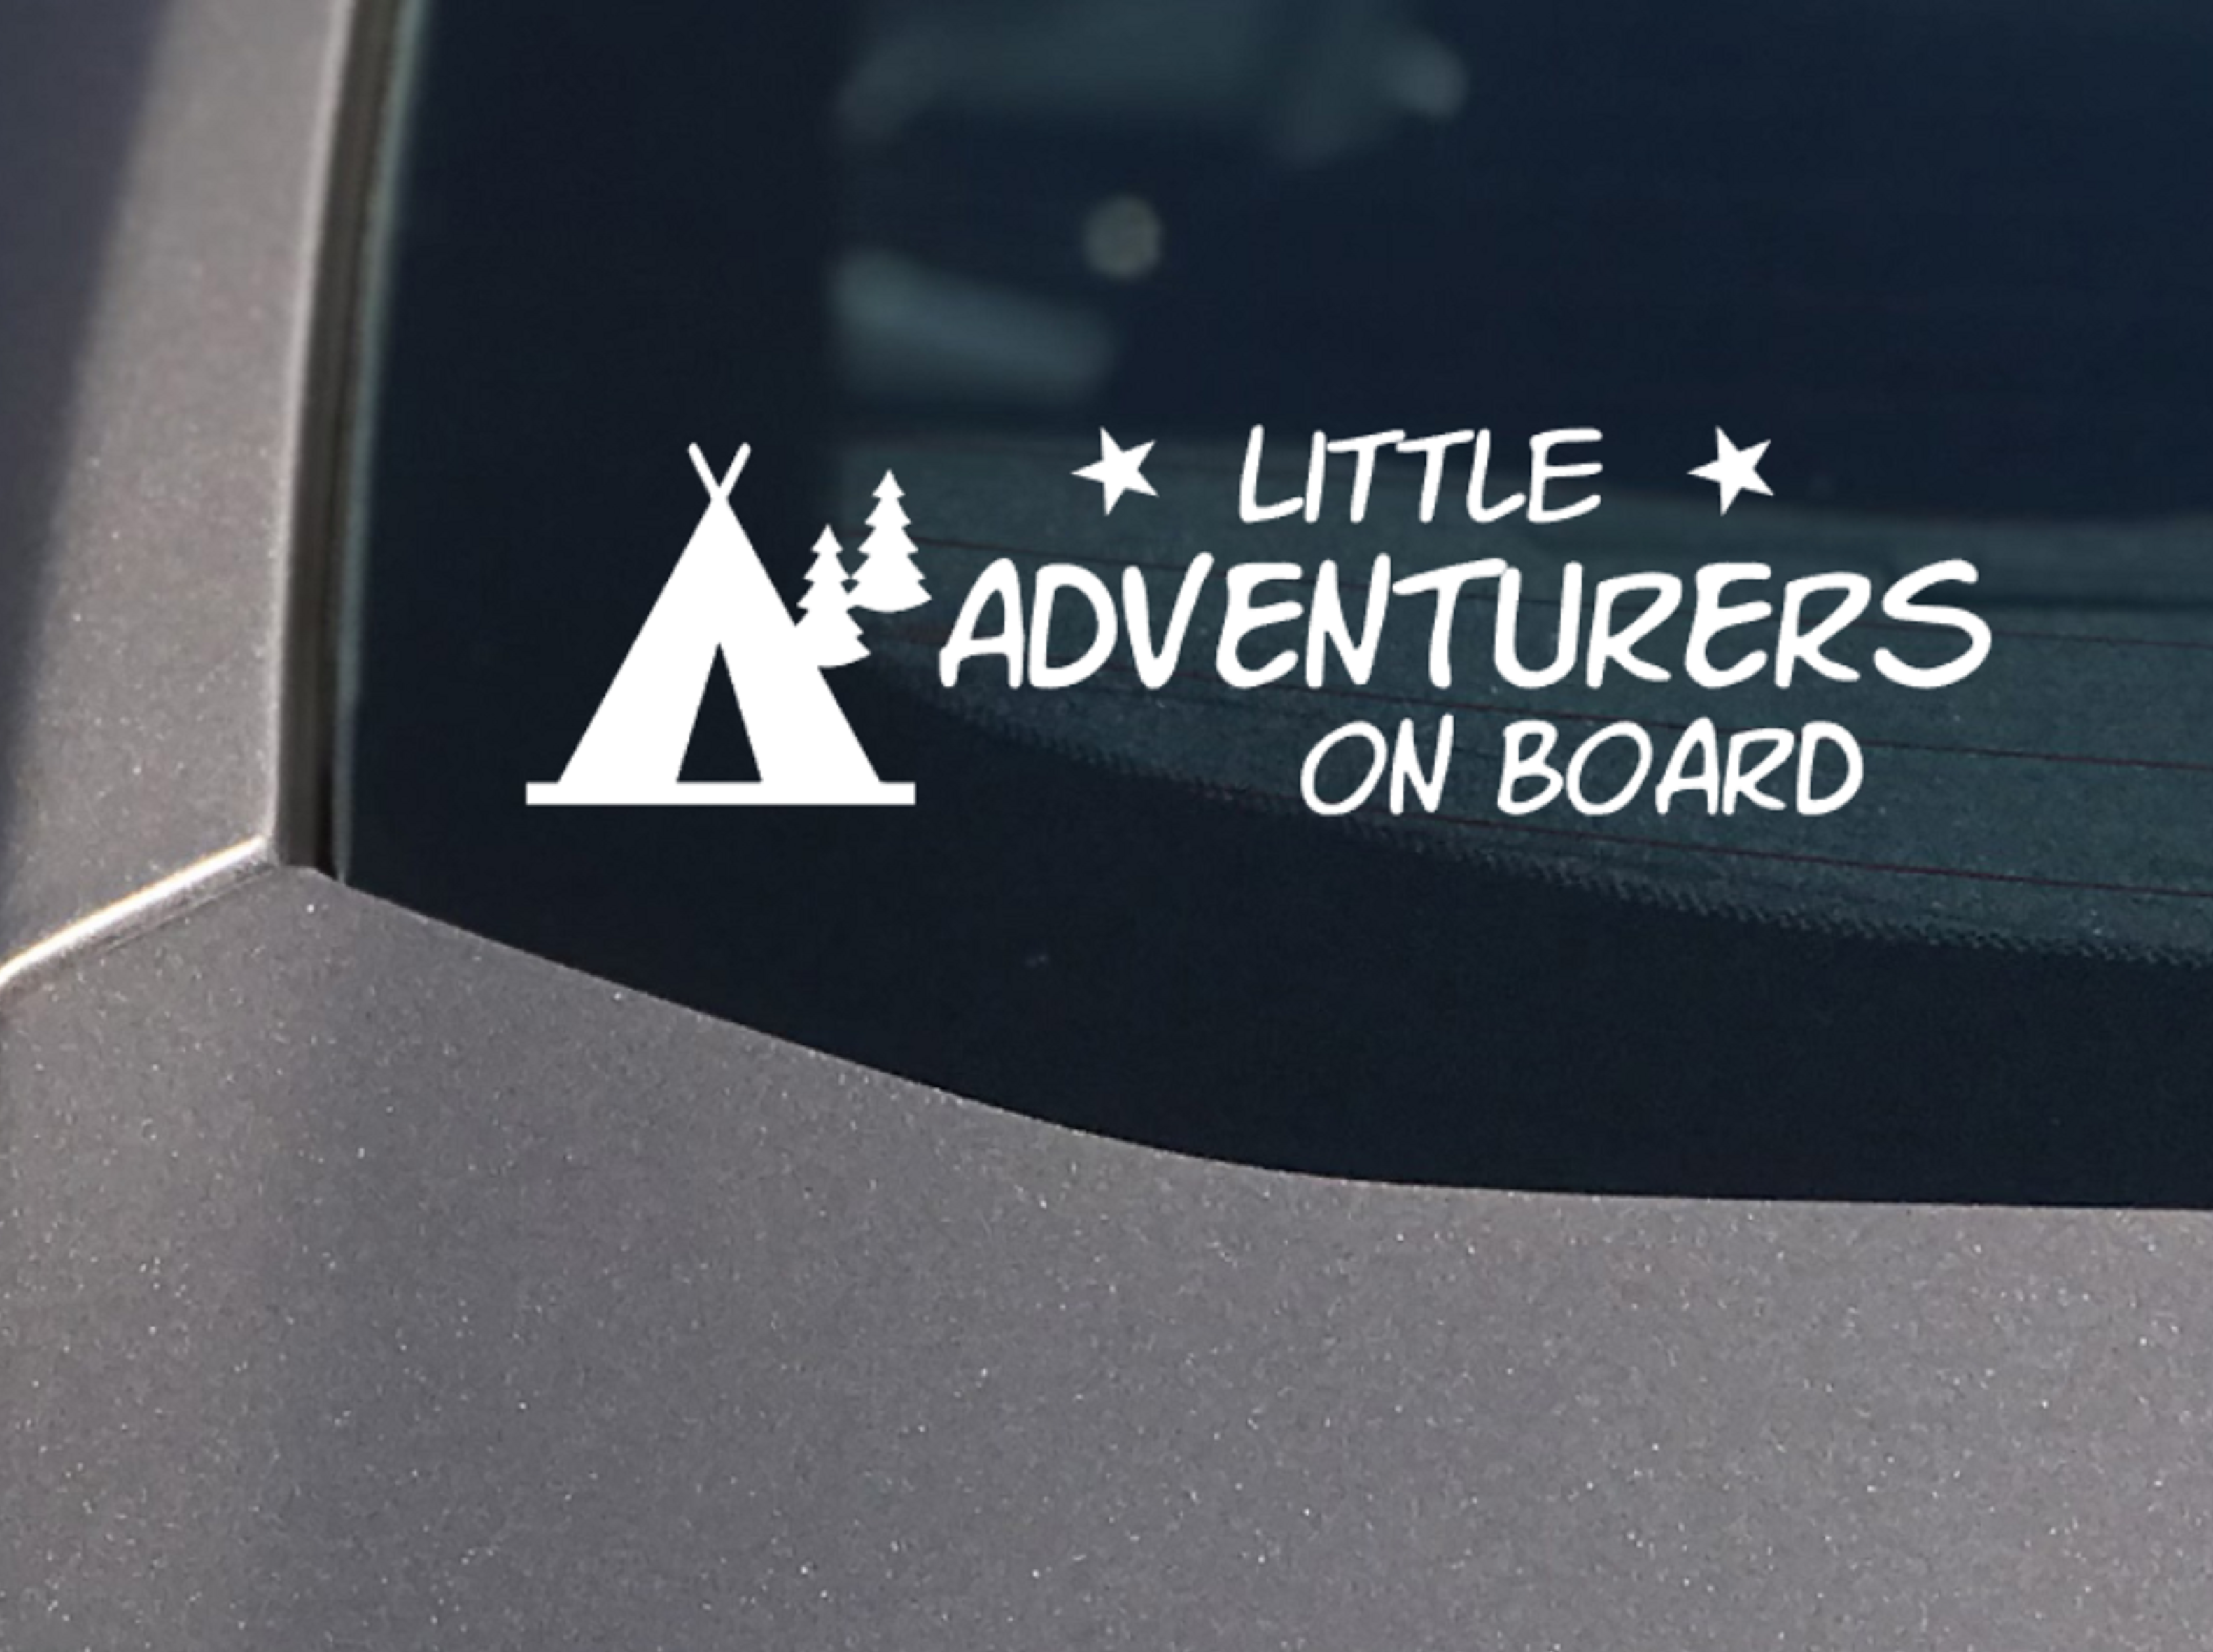 Little Adventurers On Board Car Decal. Camping with Kids - My Crafty Dog